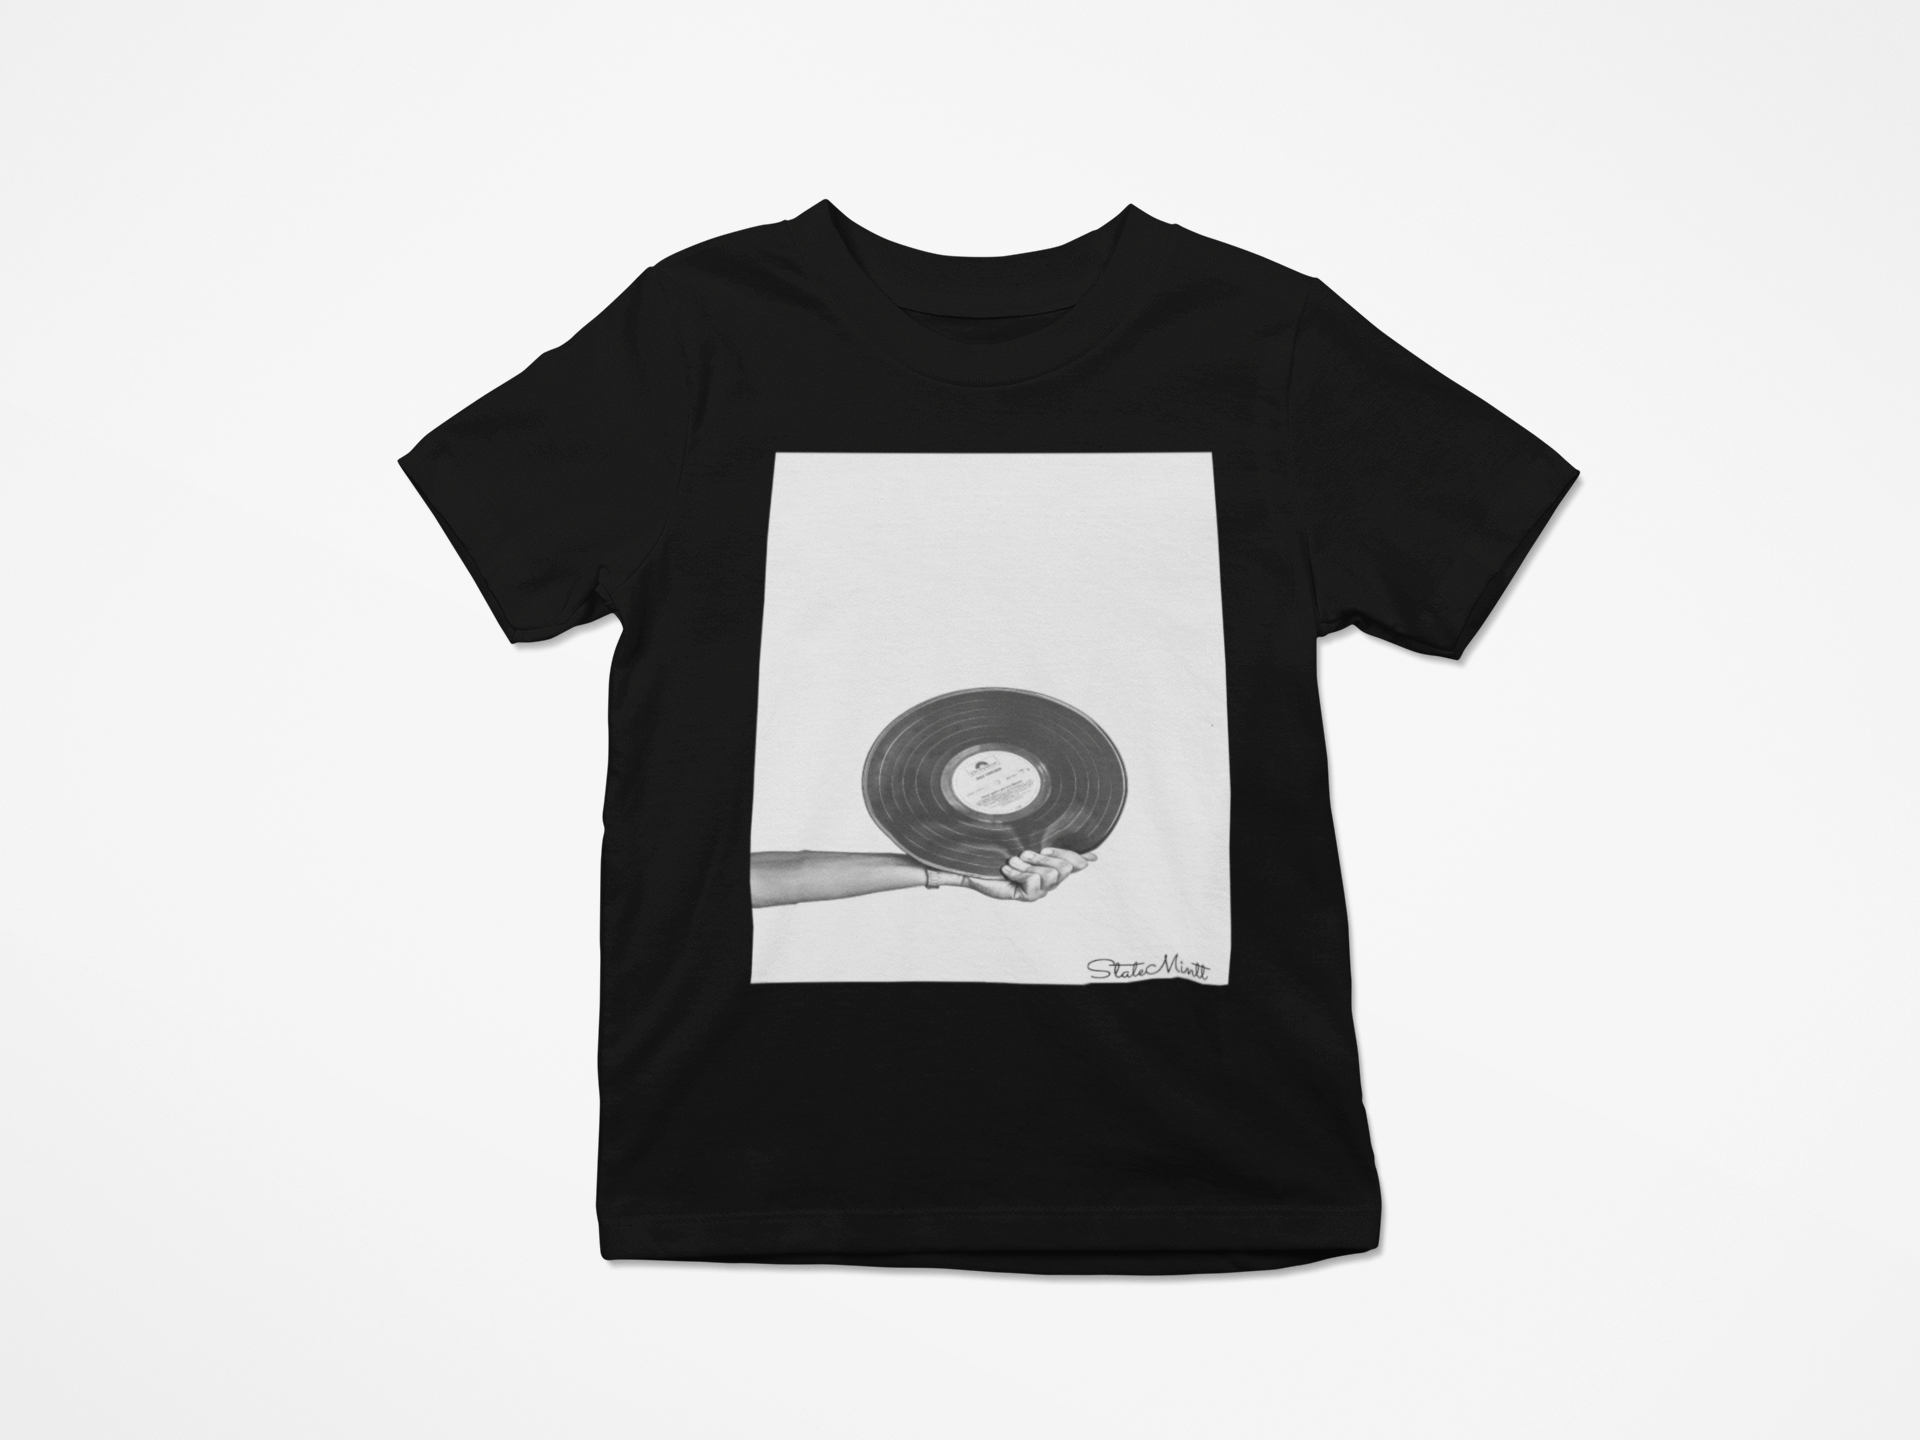 Spin This Kids Tee